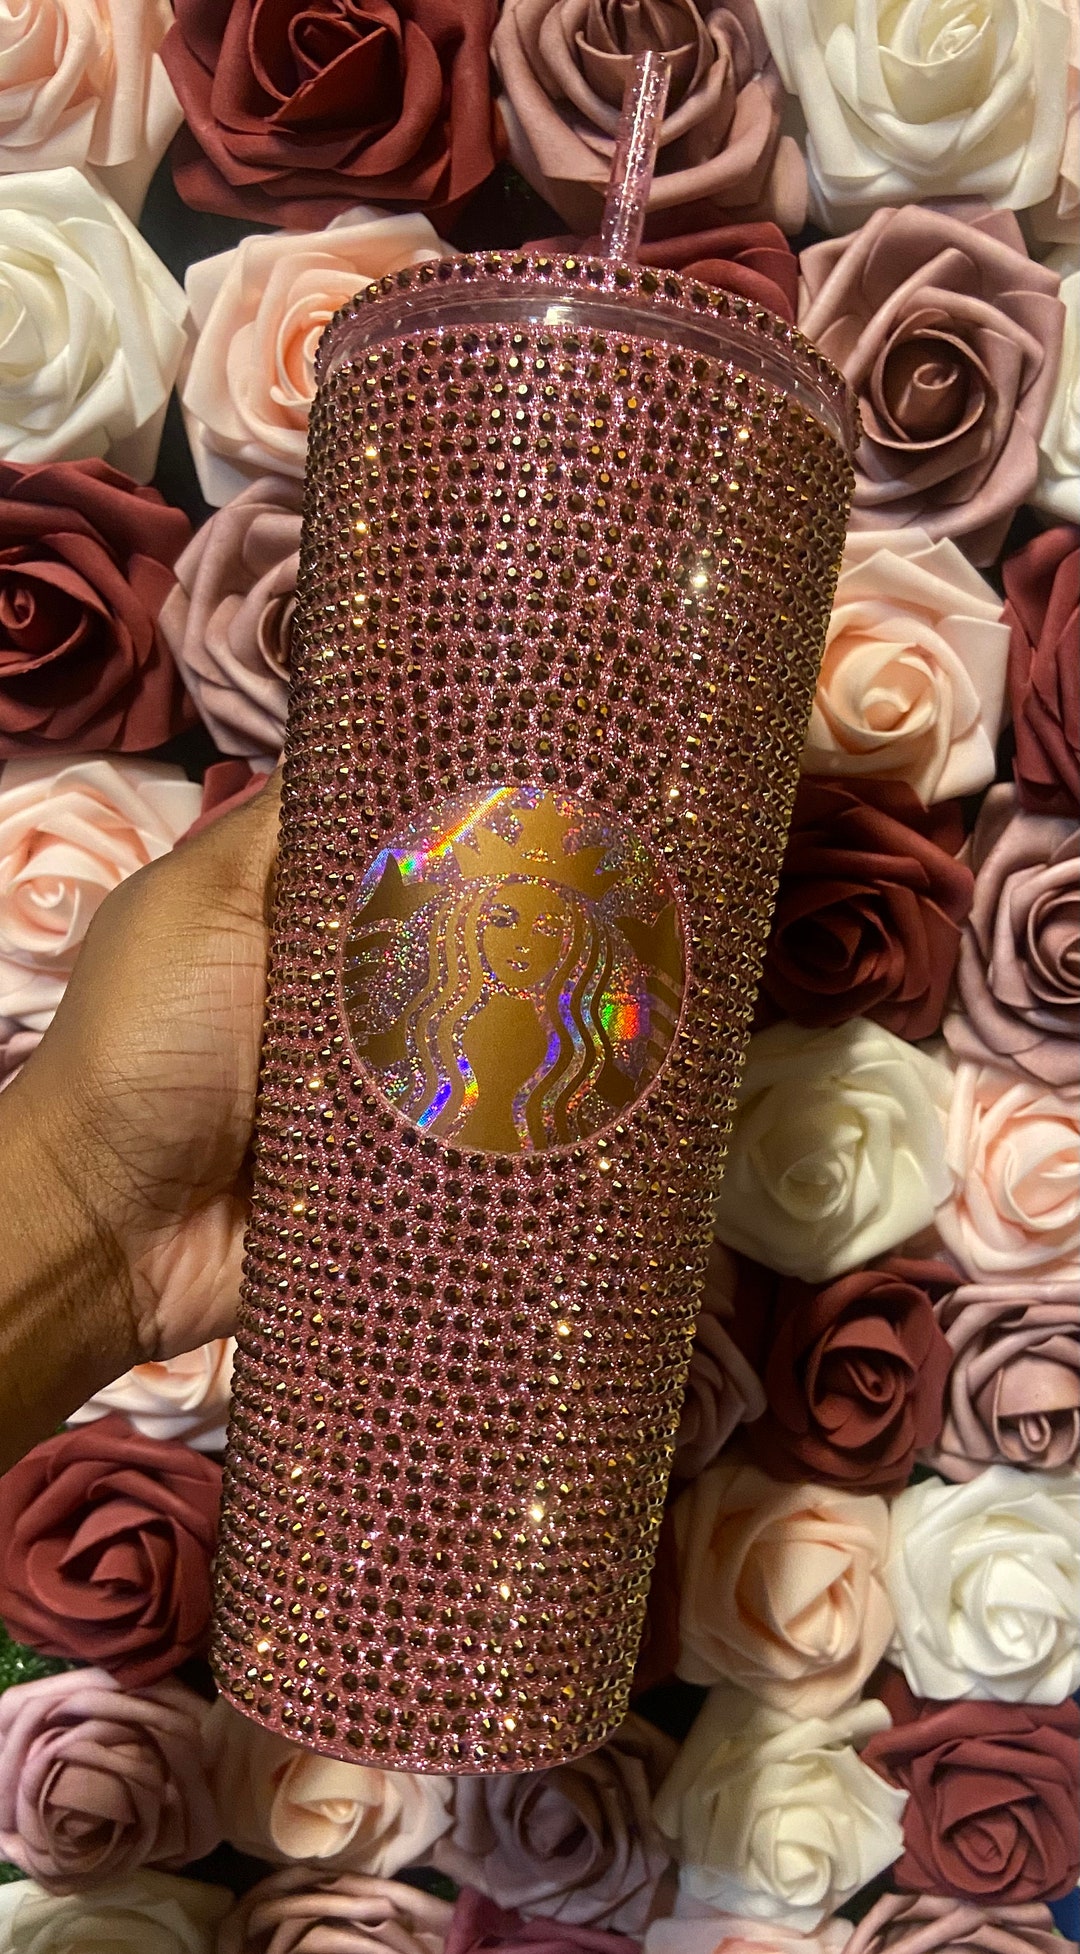 Starbucks Crystal Gold Tumbler Cup, Custom Starbucks Cup, Venti Tumbler,  Bling, Starbucks Rhinestone Cup, Coffee, Bedazzled, Presents 